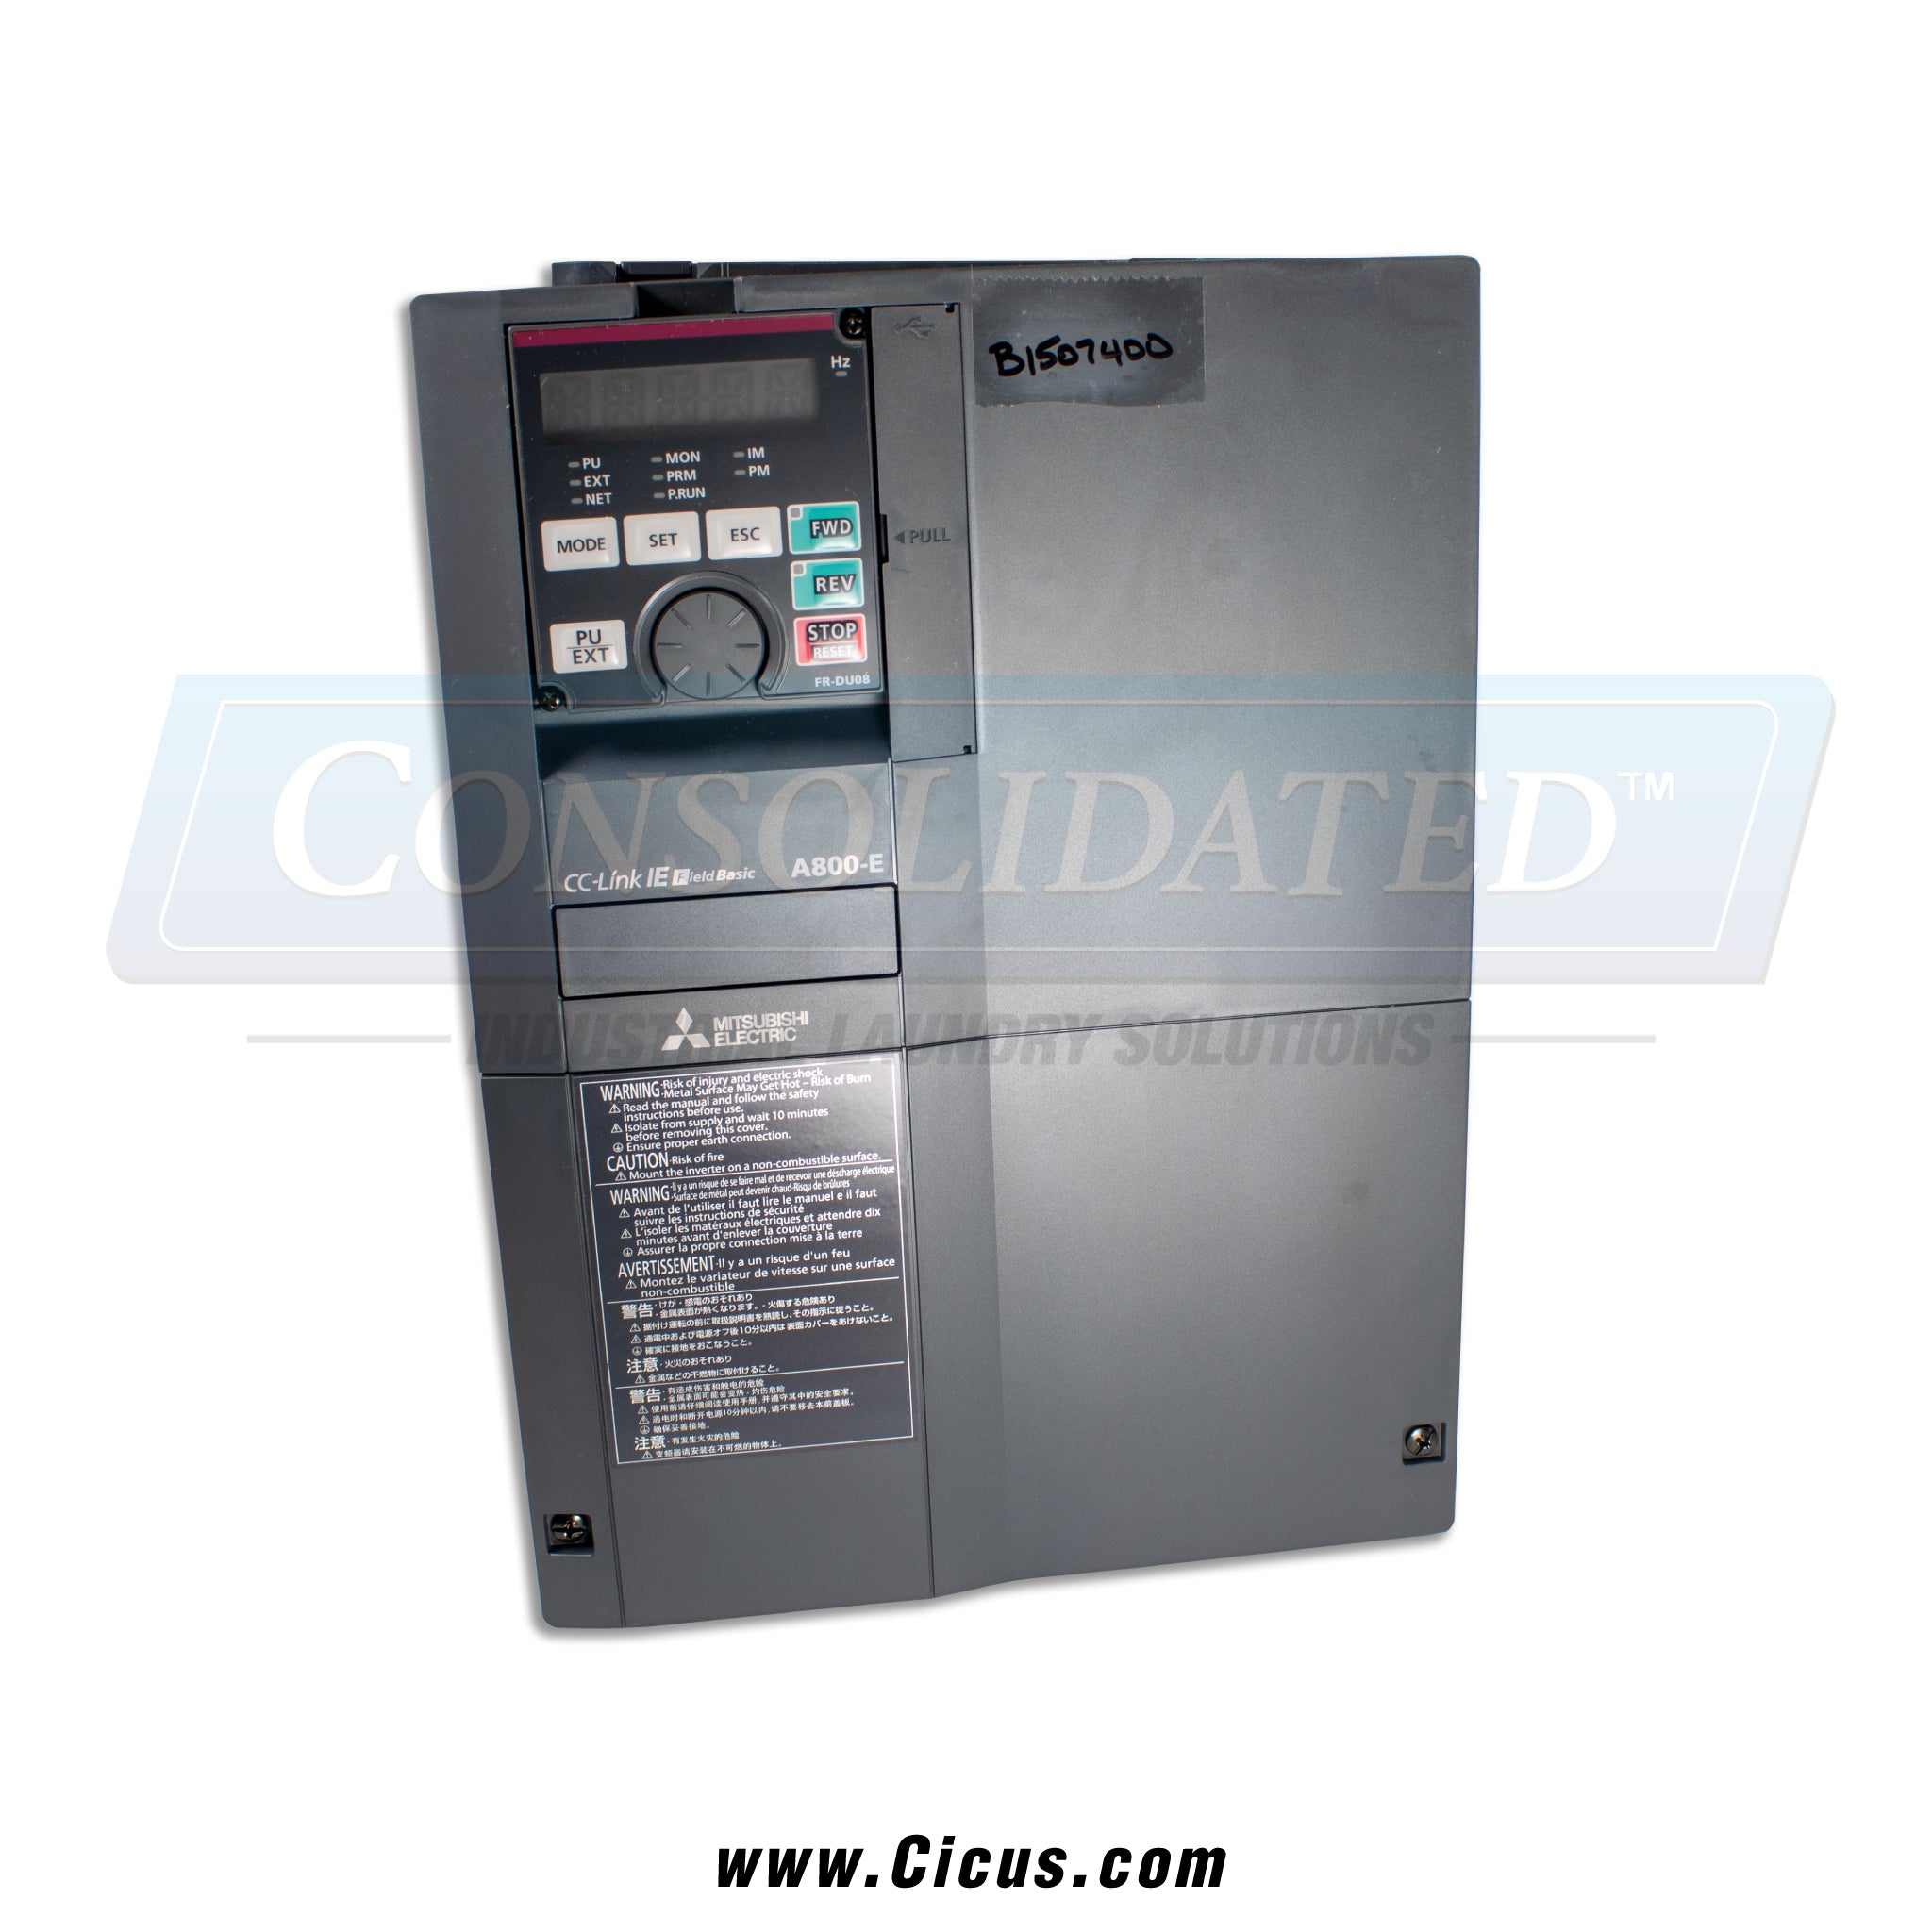 Alliance Laundry Systems Inverter -  F8421122 [FR-A740-00310]